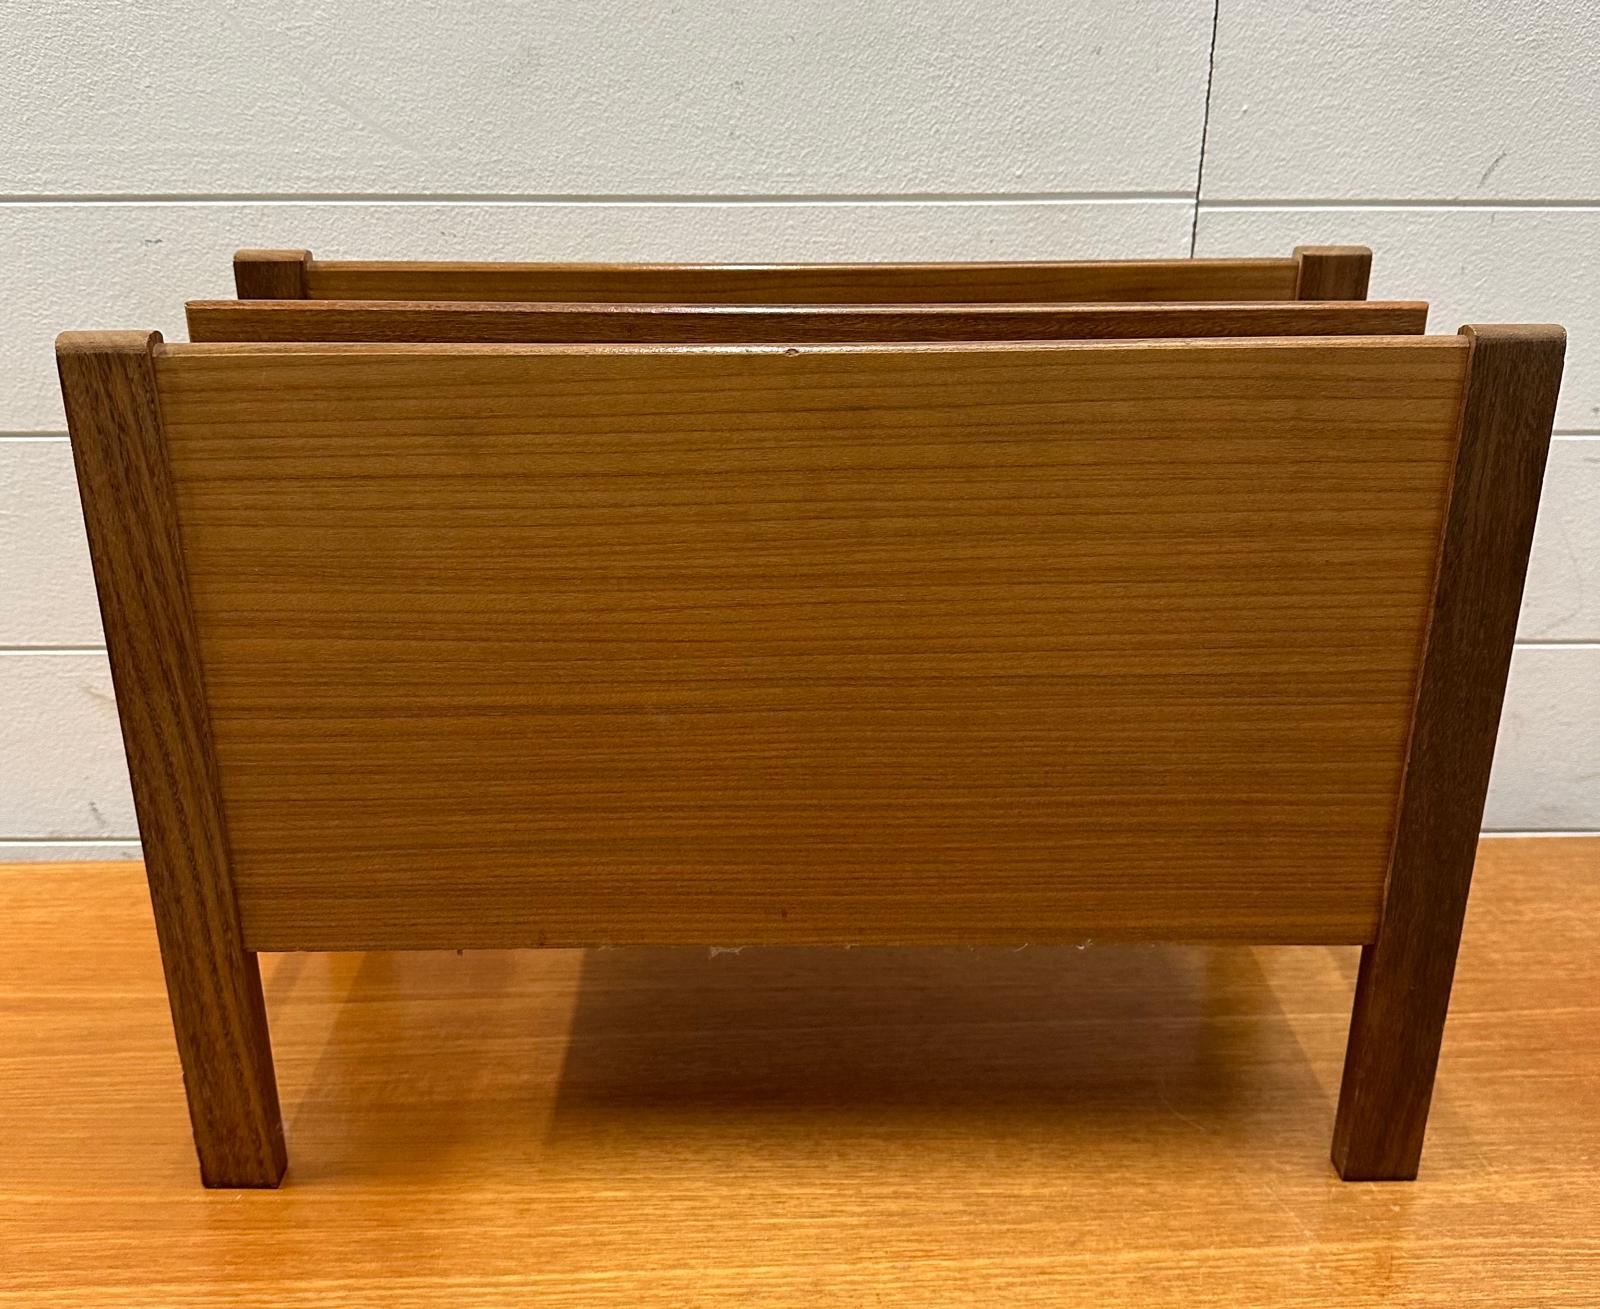 A Mid Century two compartment teak magazine rack - Image 2 of 2